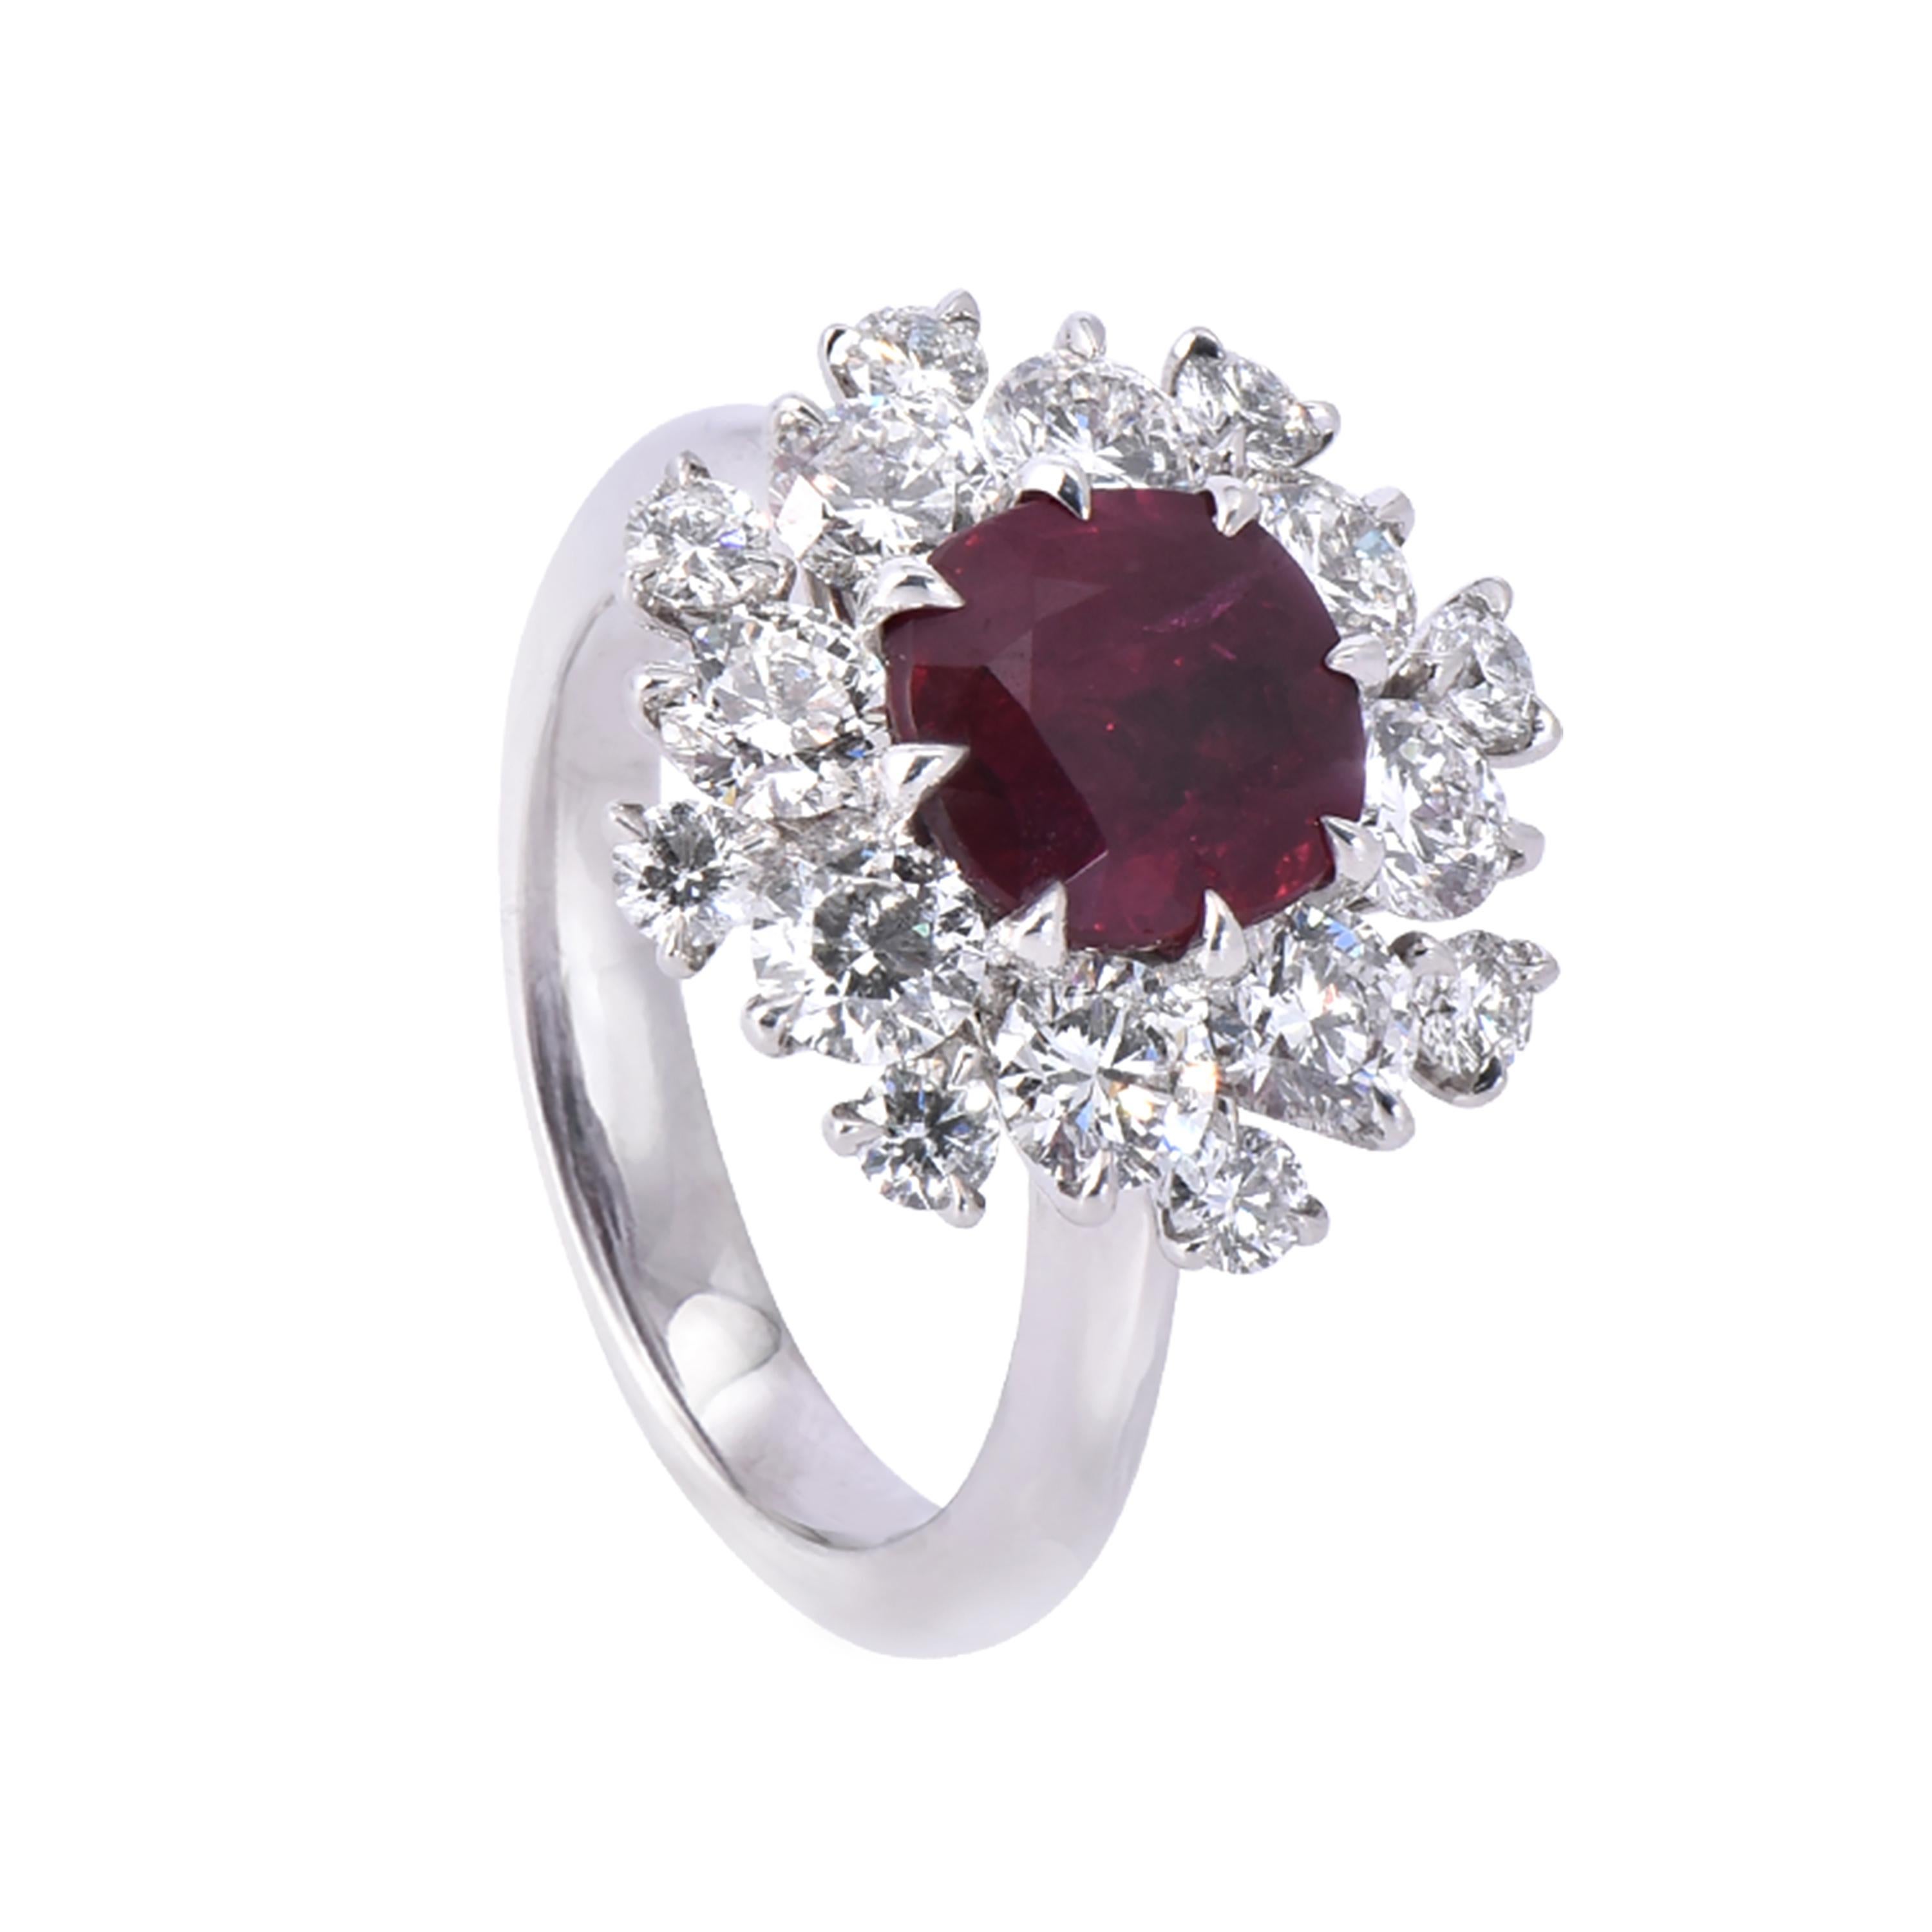 A classic 18 karat white gold ruby ring from the Carmine collection of Laviere. The ring is set with a 3.21 carats GIA certified Burmese vivid red cushion-cut ruby and 2.45 carats round brilliant diamonds. 
Gold Weight 9.69 grams. Diamond Clarity